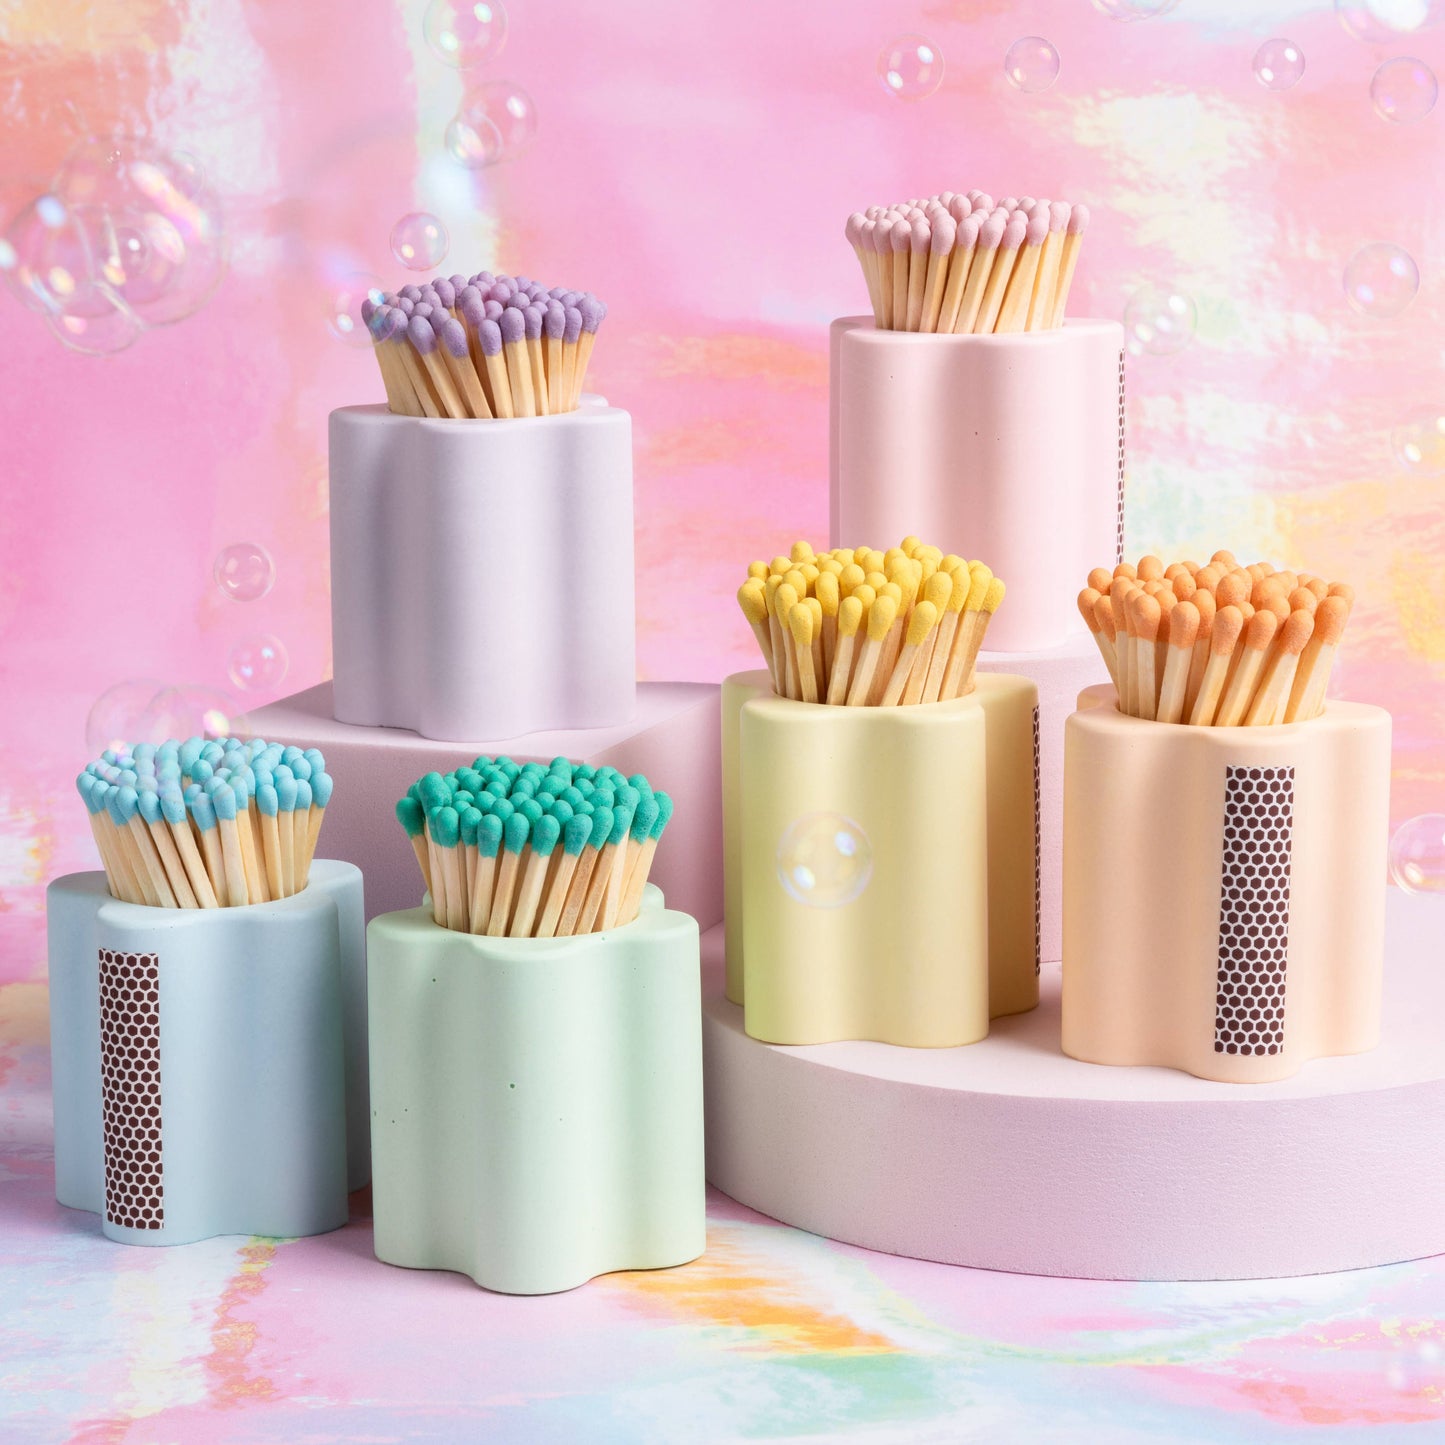 Pastel Flower Vessel with Colorful Matchsticks: Pink